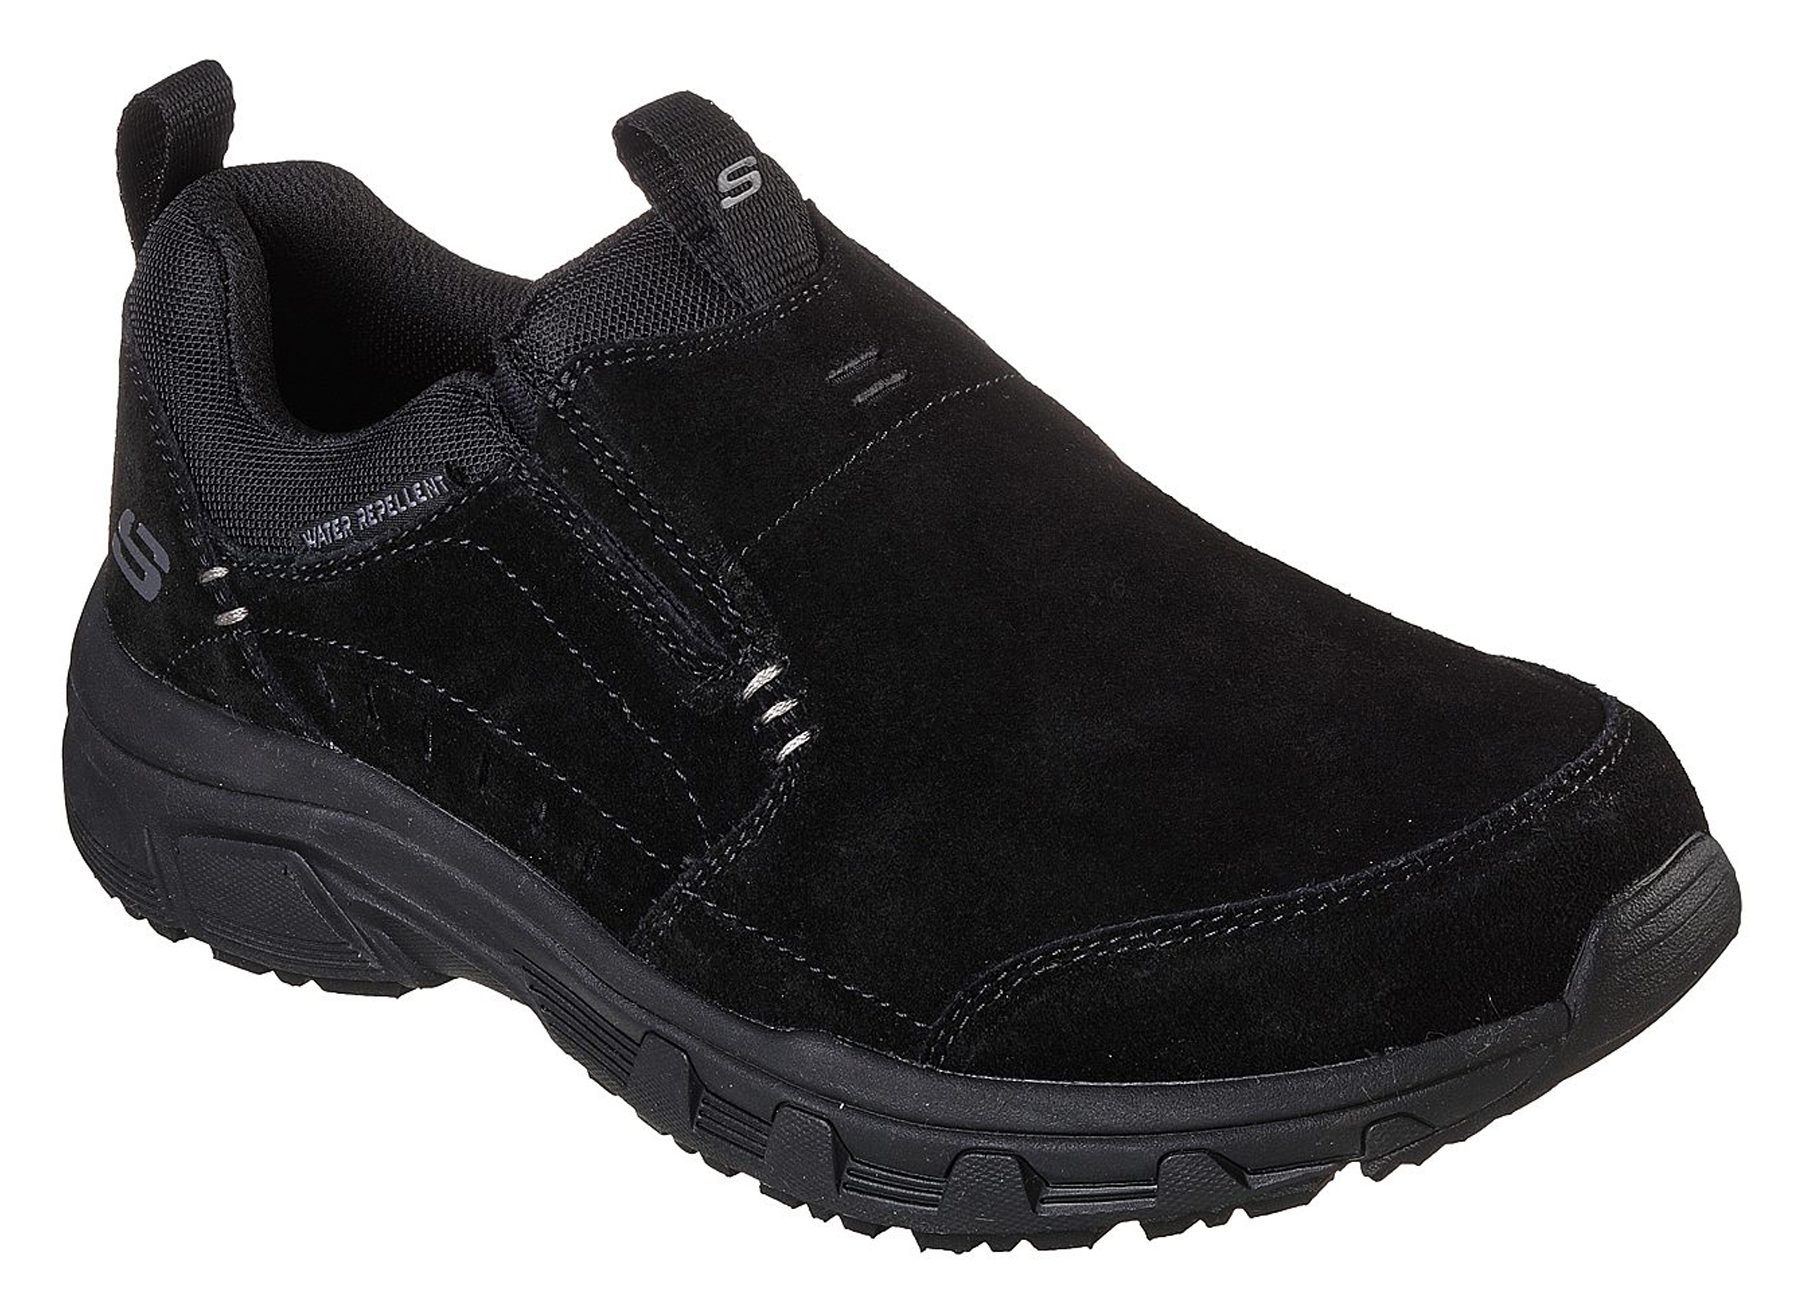 Skechers Relaxed Fit: Oak Canyon Black 237282 BBK - Casual Shoes ...